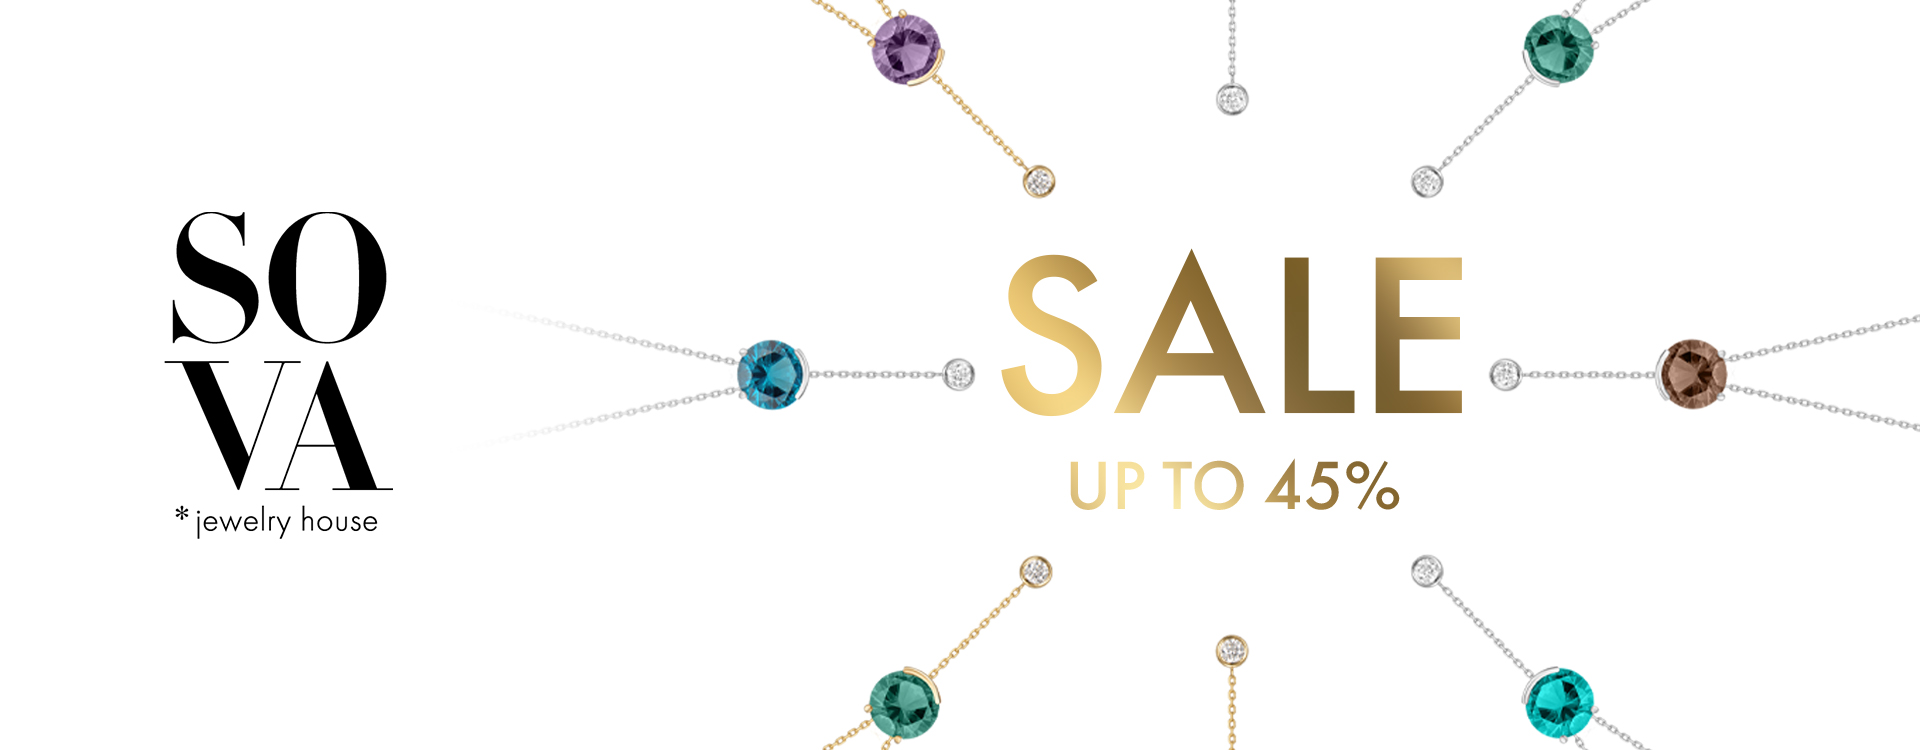 Discounts up to -45% on jewelry at SOVA